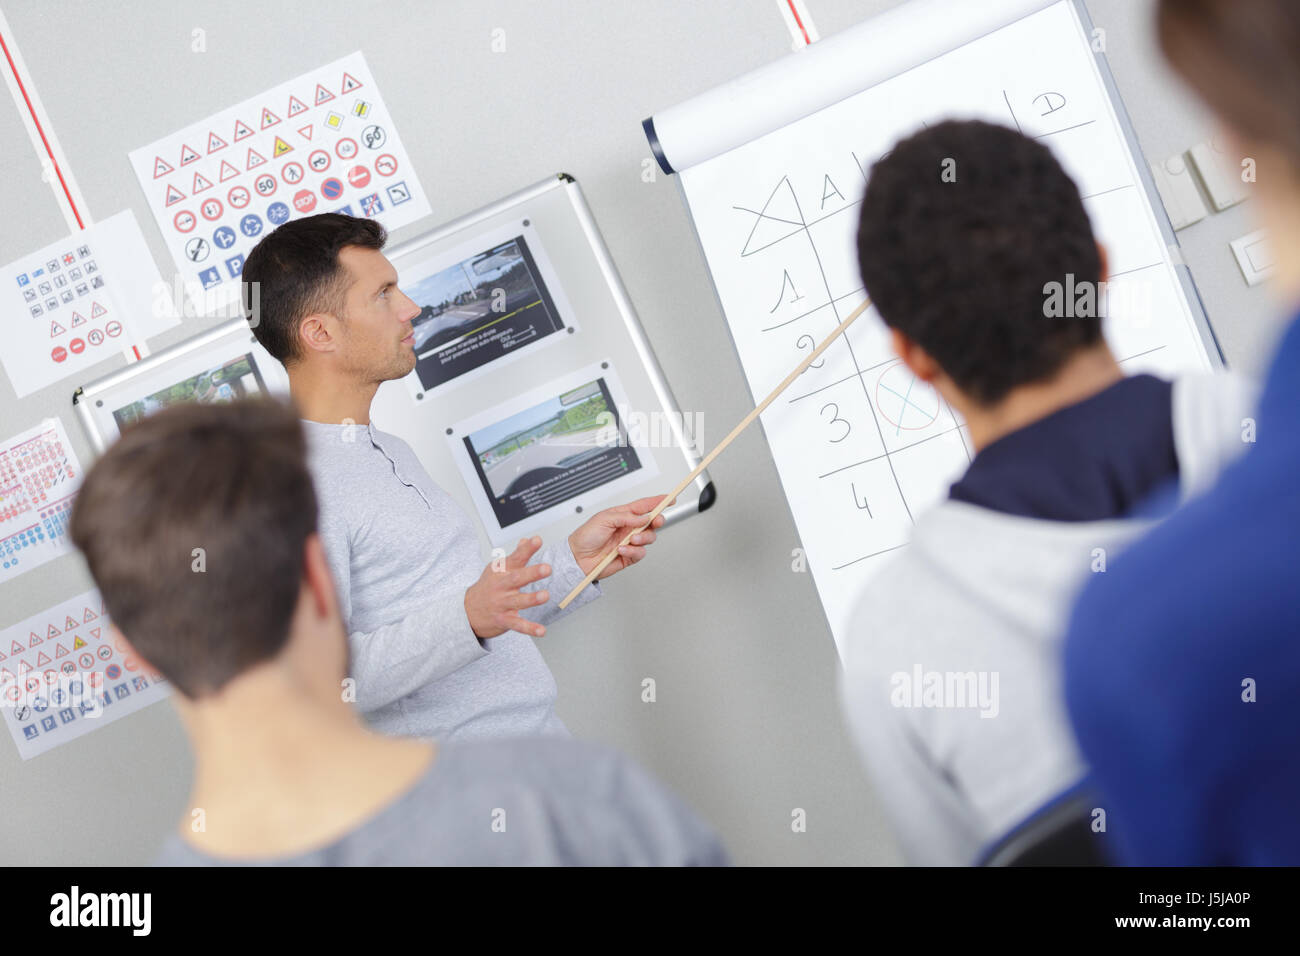 Teacher working through flip chart with students Stock Photo